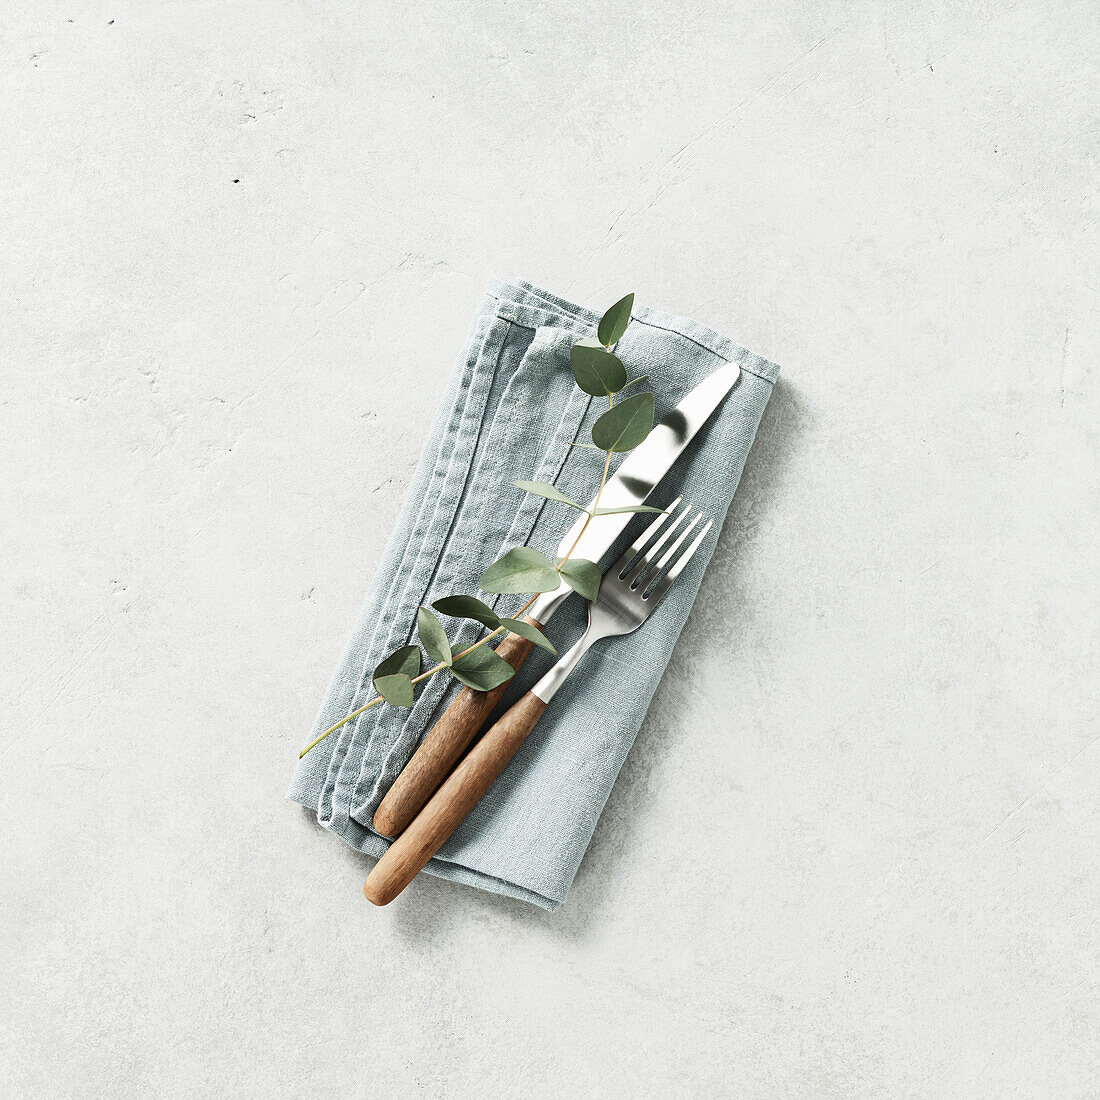 Set table with linen napkin, fork, knife and eucalyptus on grey background Square composition